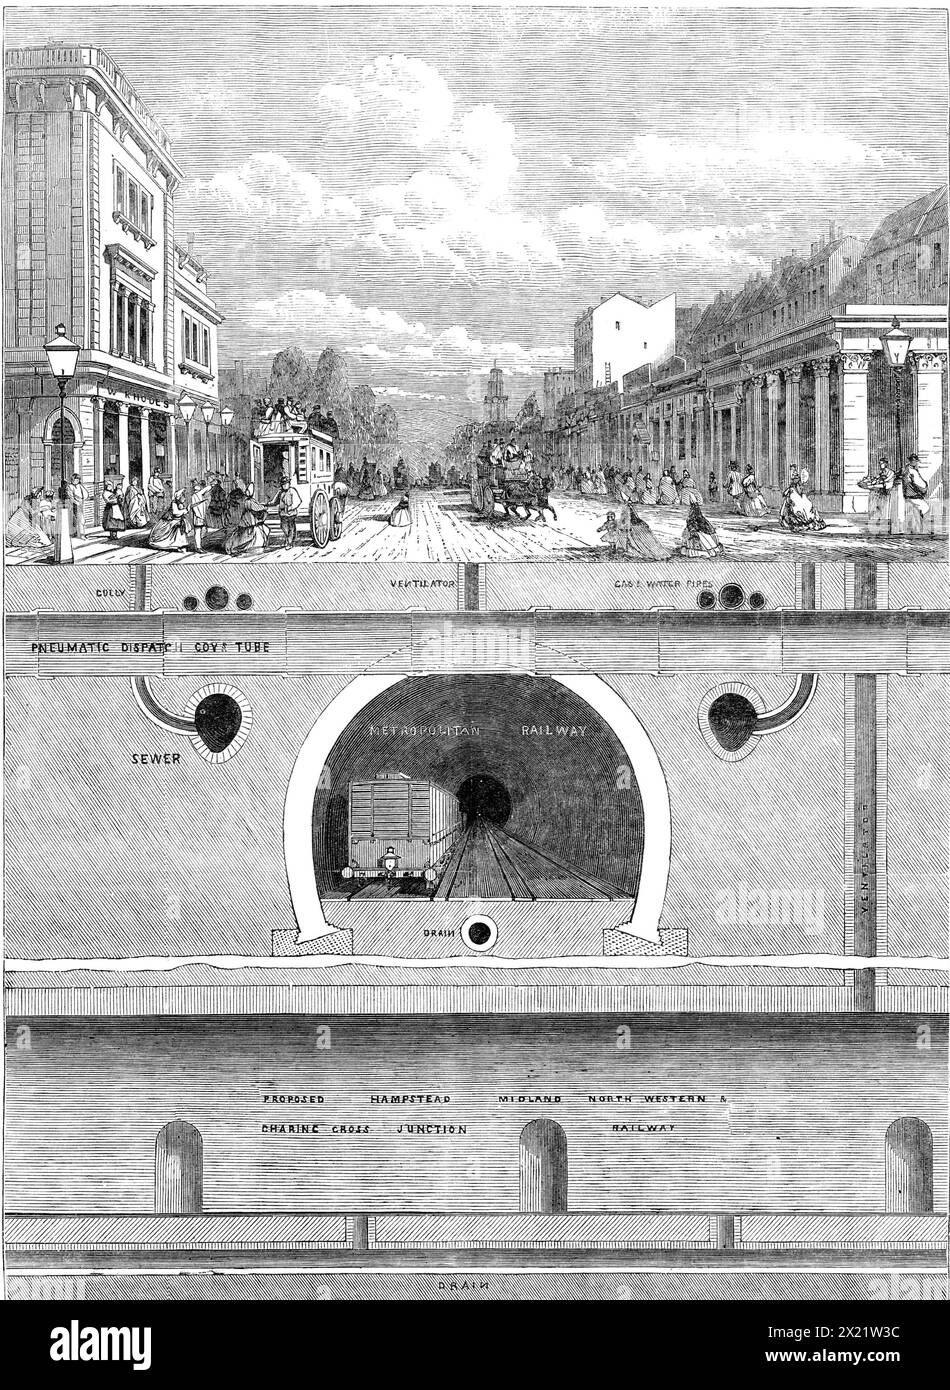 Underground works at the junction of Hampstead-Road, Euston-Road, and Tottenham-Court-Road, 1864. View showing '...what extensive subterranean works are being constructed in different parts of London, yet which make no show on the surface, and the very existence of which is probably unknown to a very large portion of the inhabitants...daily walking over the site...the lines of a number of different works intersect each other [here]. There is, first, immediately under the surface of the road, a double set of mains and pipes for supplying...water and gas. Beneath these passes, transversely, the Stock Photo